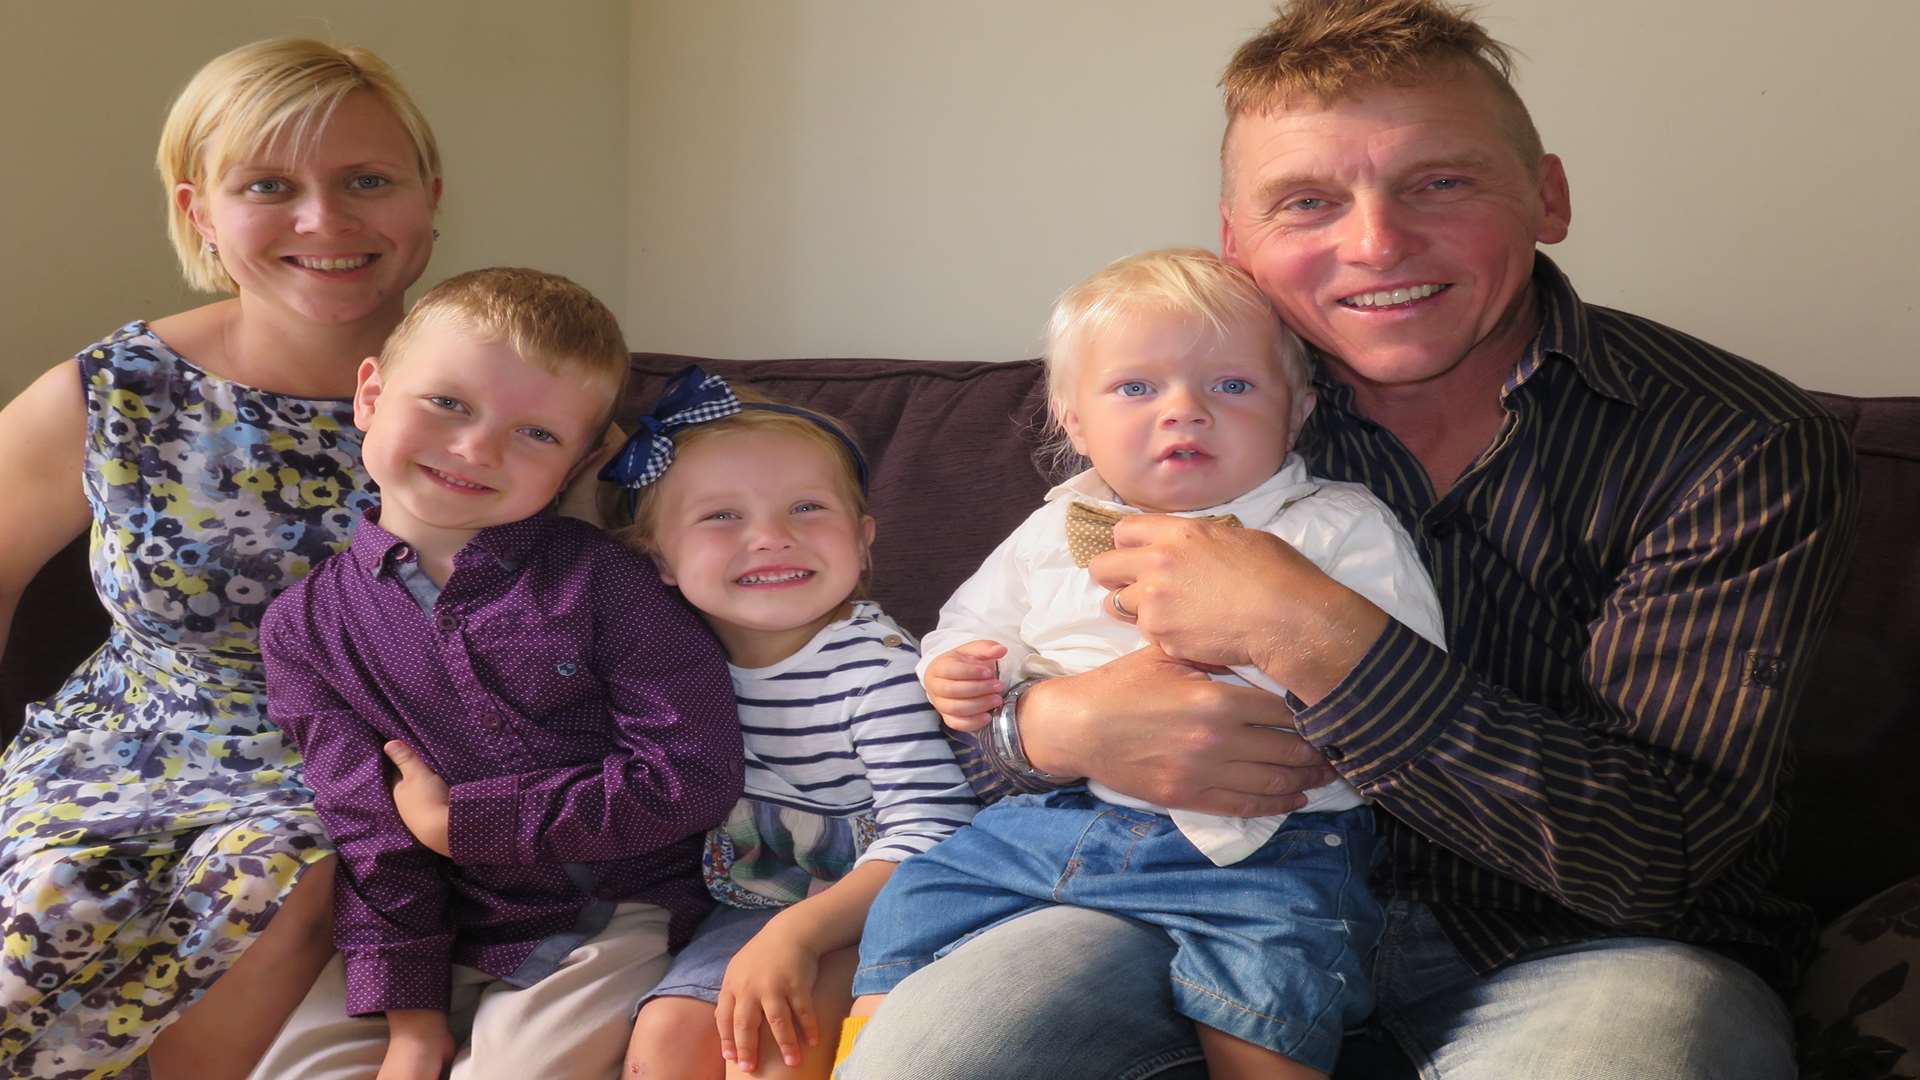 Tony and Larisa Caplin with their children Emlyn, 5, Ramashka Buttercup, 3 and Charlie, 18 months